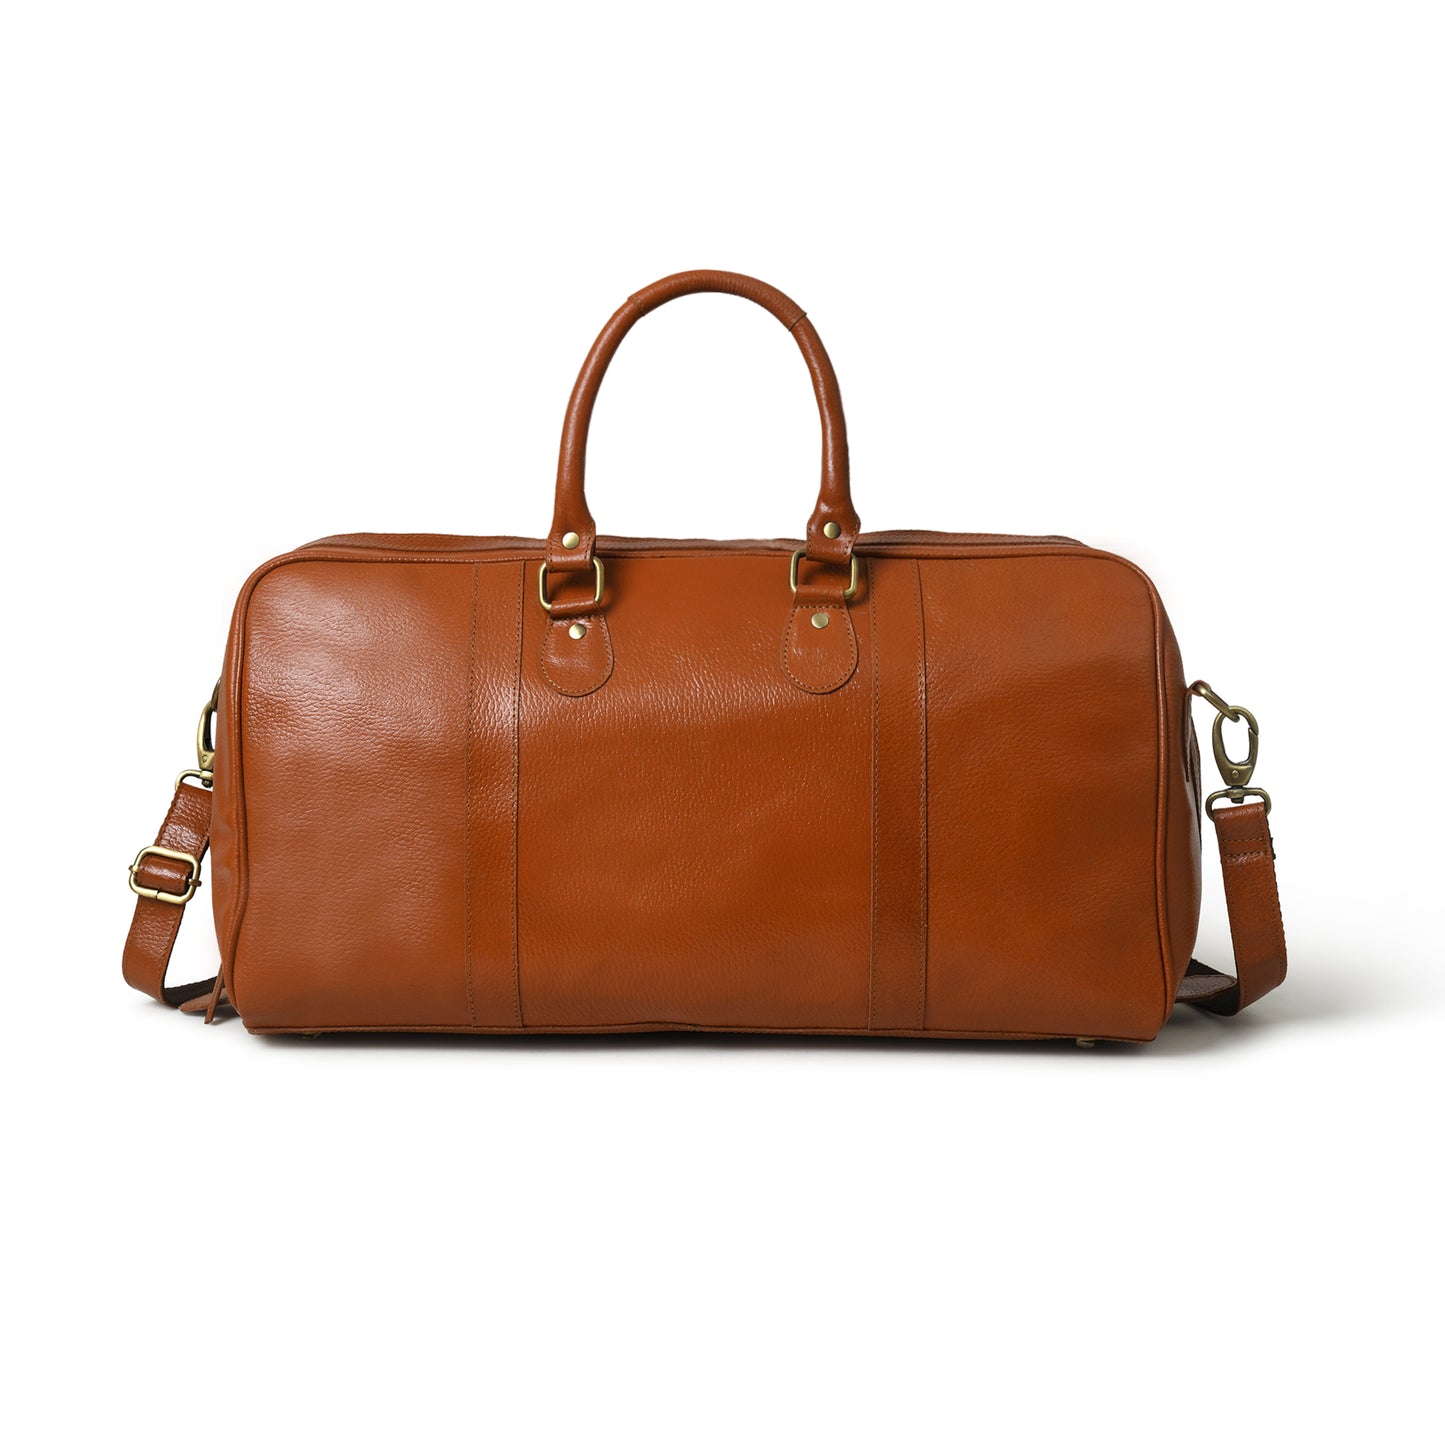 The Brown Crunch Duffle